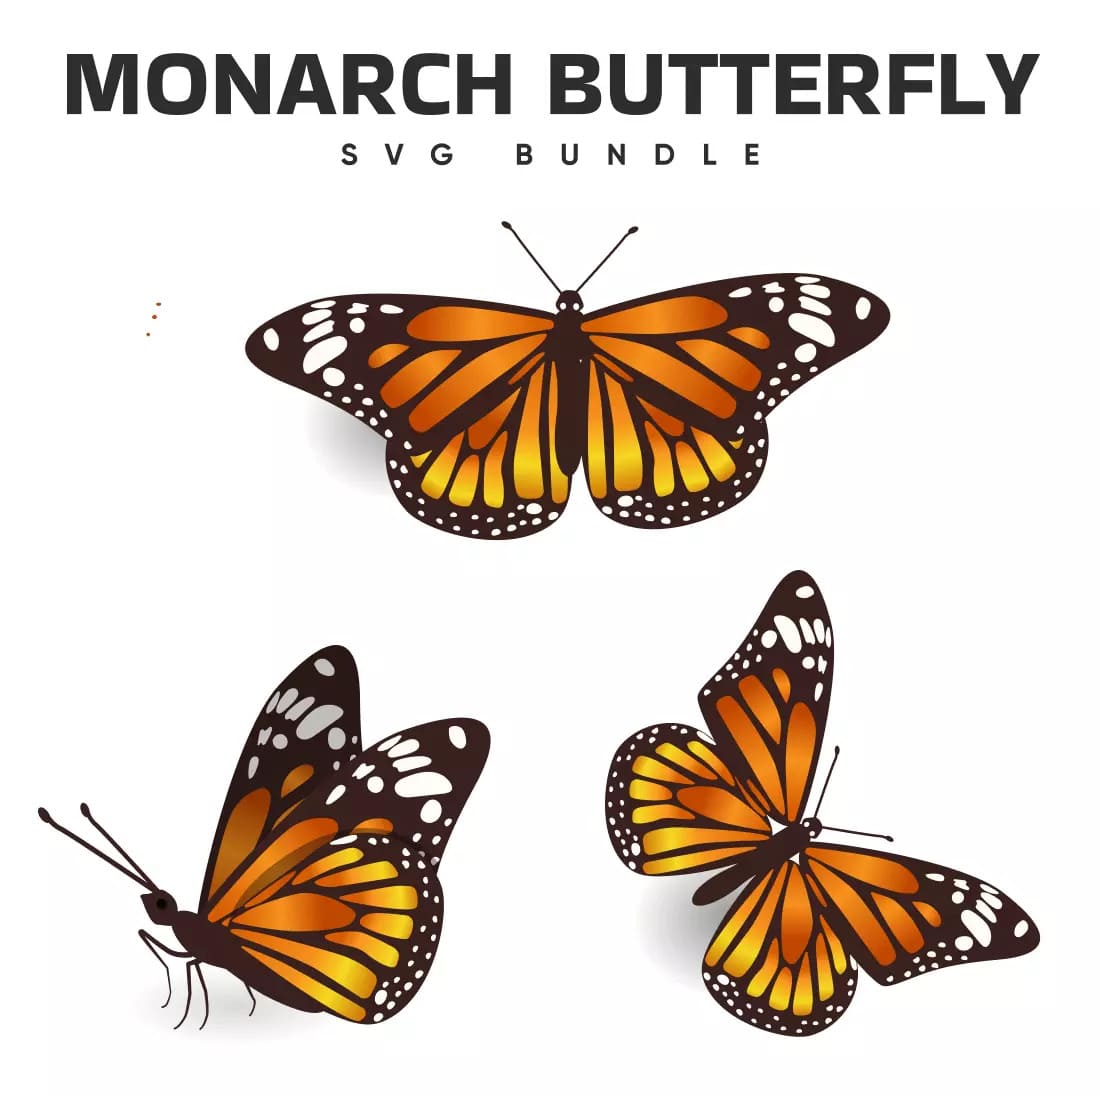 Three monarch butterflies with the words monarch butterfly svg bundle.